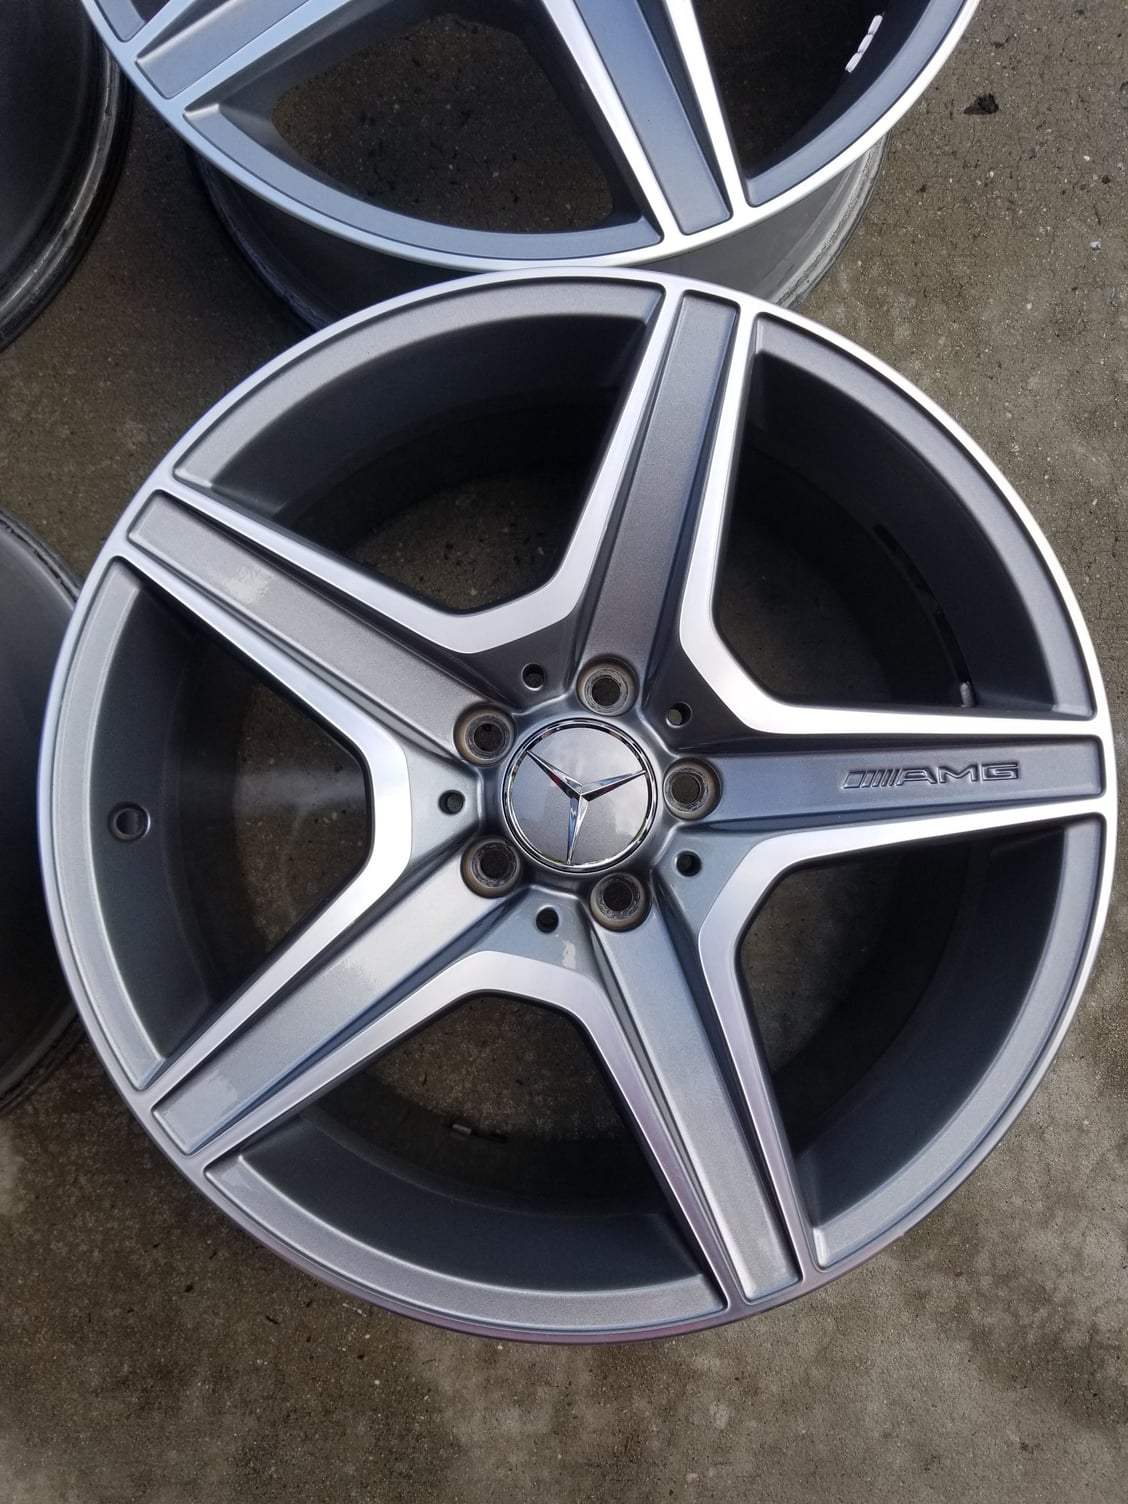 Wheels and Tires/Axles - W204 C63 Factory Wheels - Used - 2008 to 2014 Mercedes-Benz C63 AMG - Charlotte, NC 28078, United States